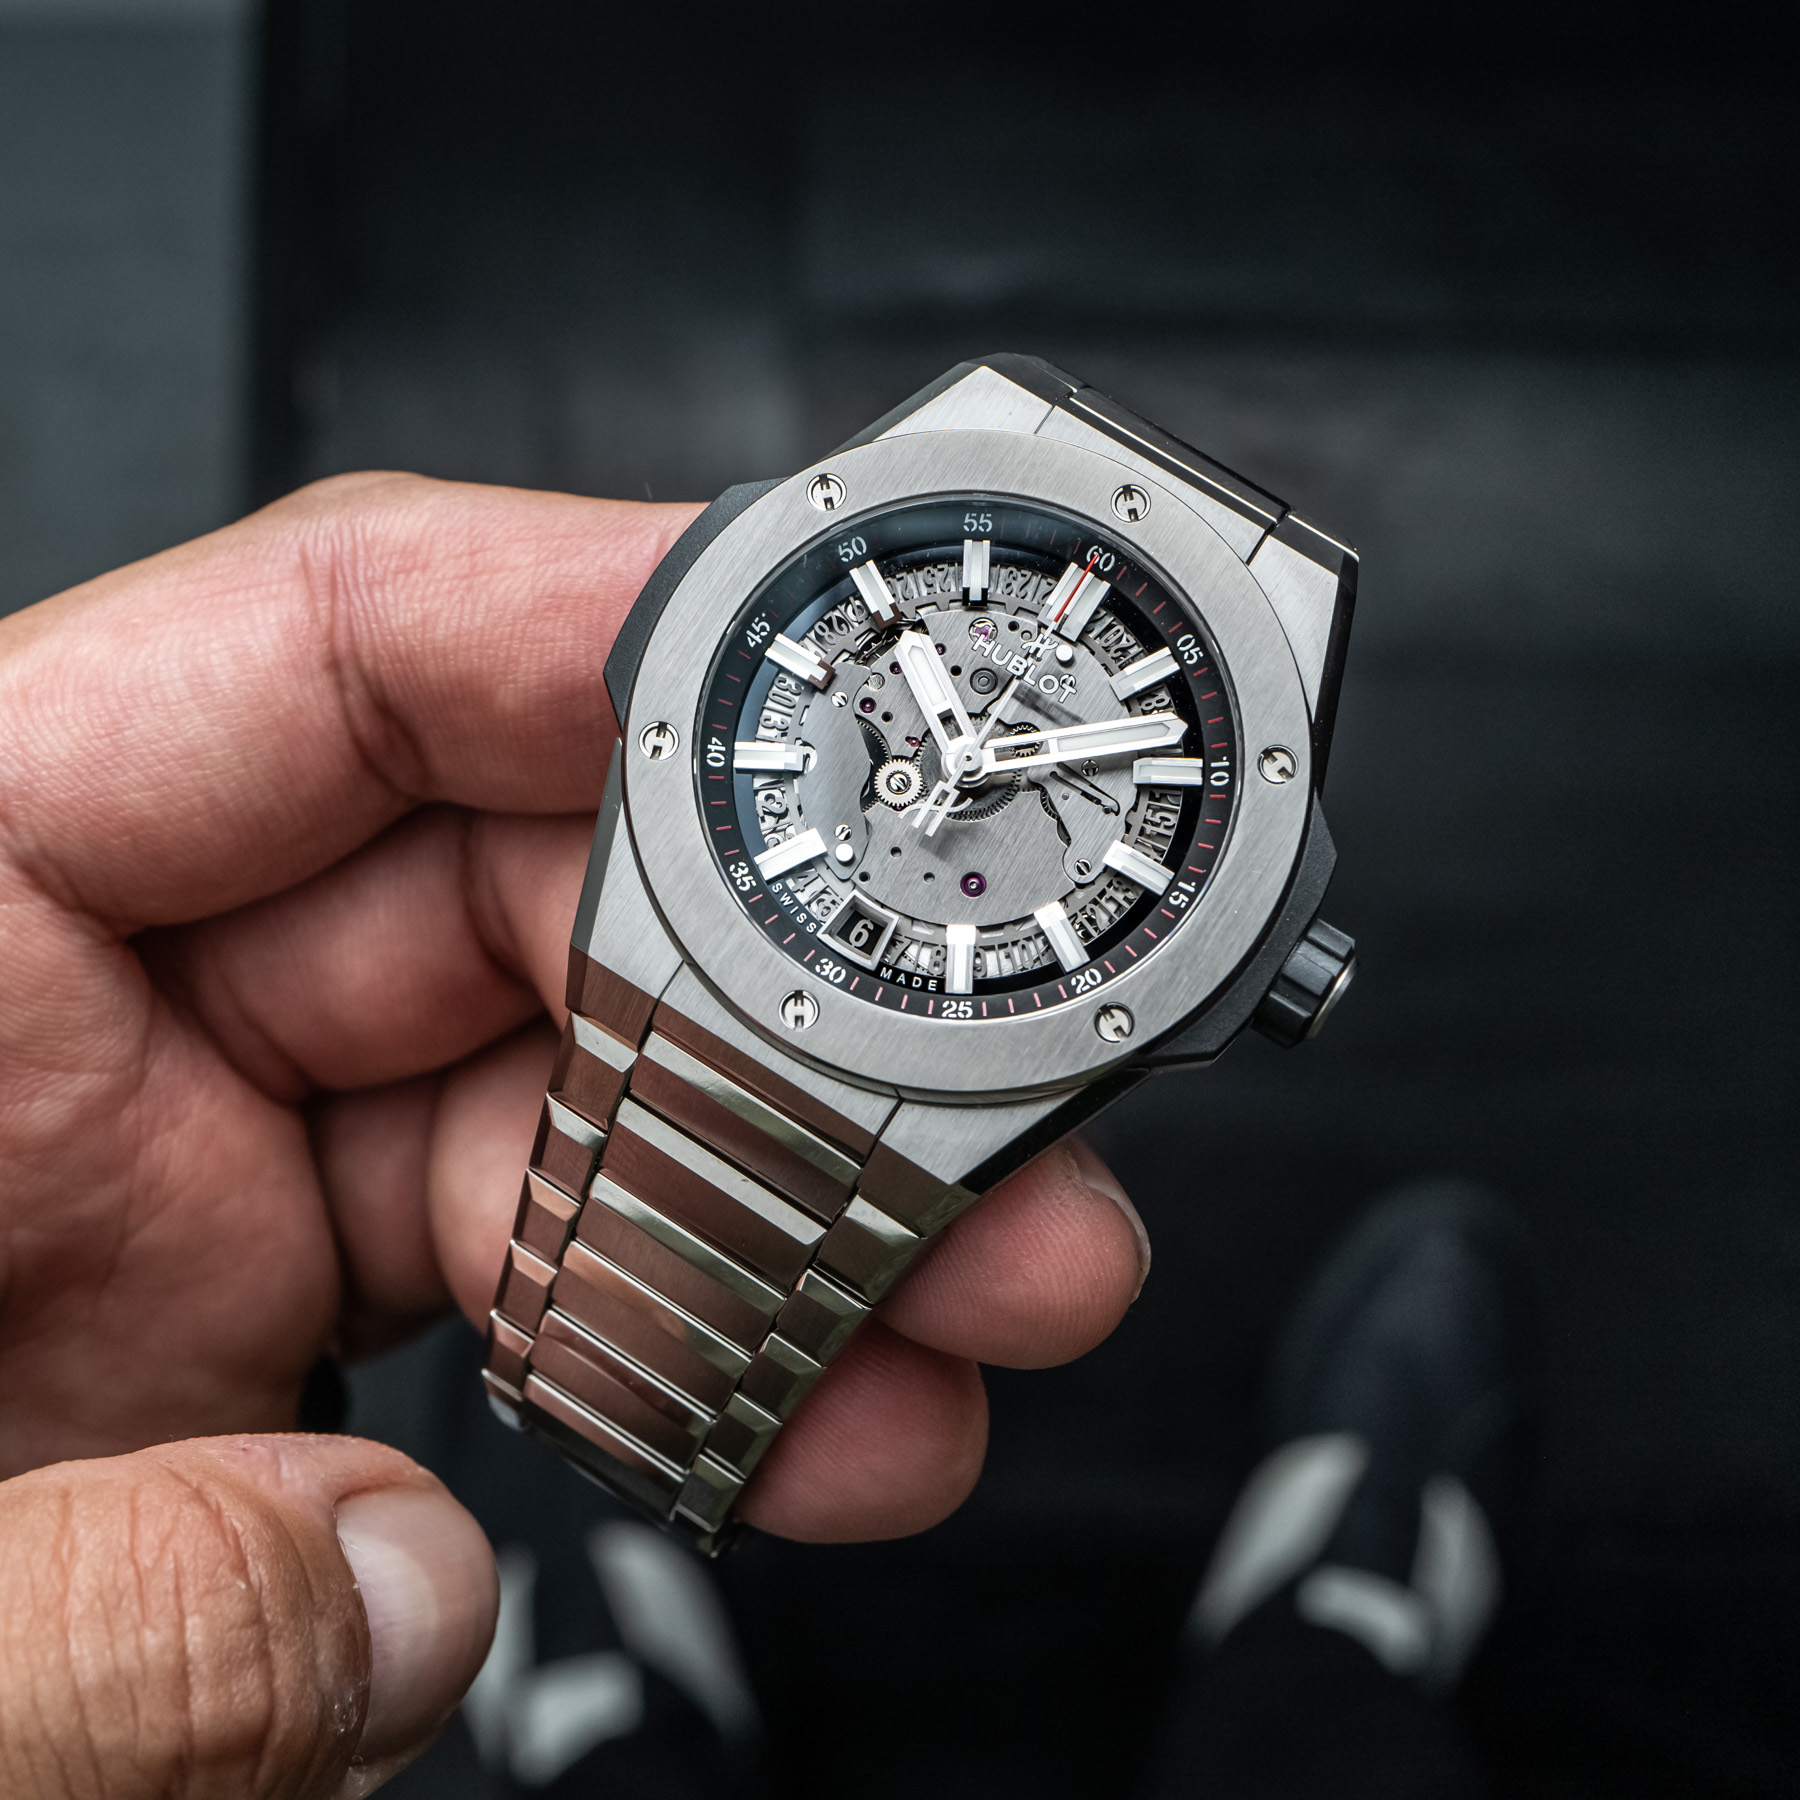 Hands-On: Hublot Big Bang Integral Time Only Watches